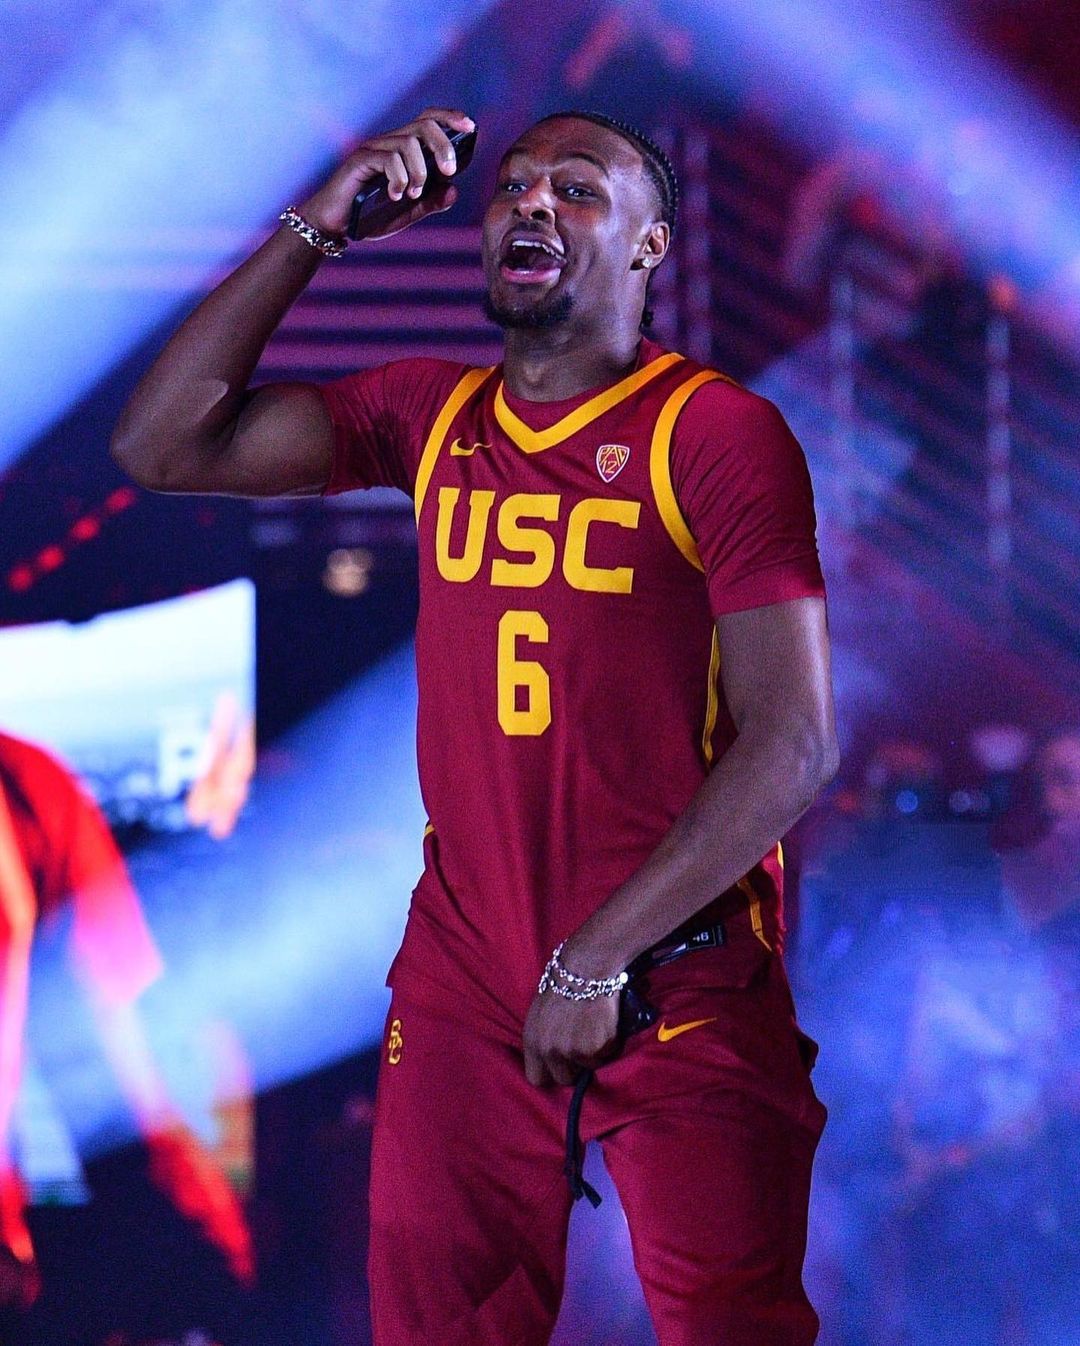 KING OF THE DANCE! On USC's basketball season opener, Bronny James danced with the team but did not play